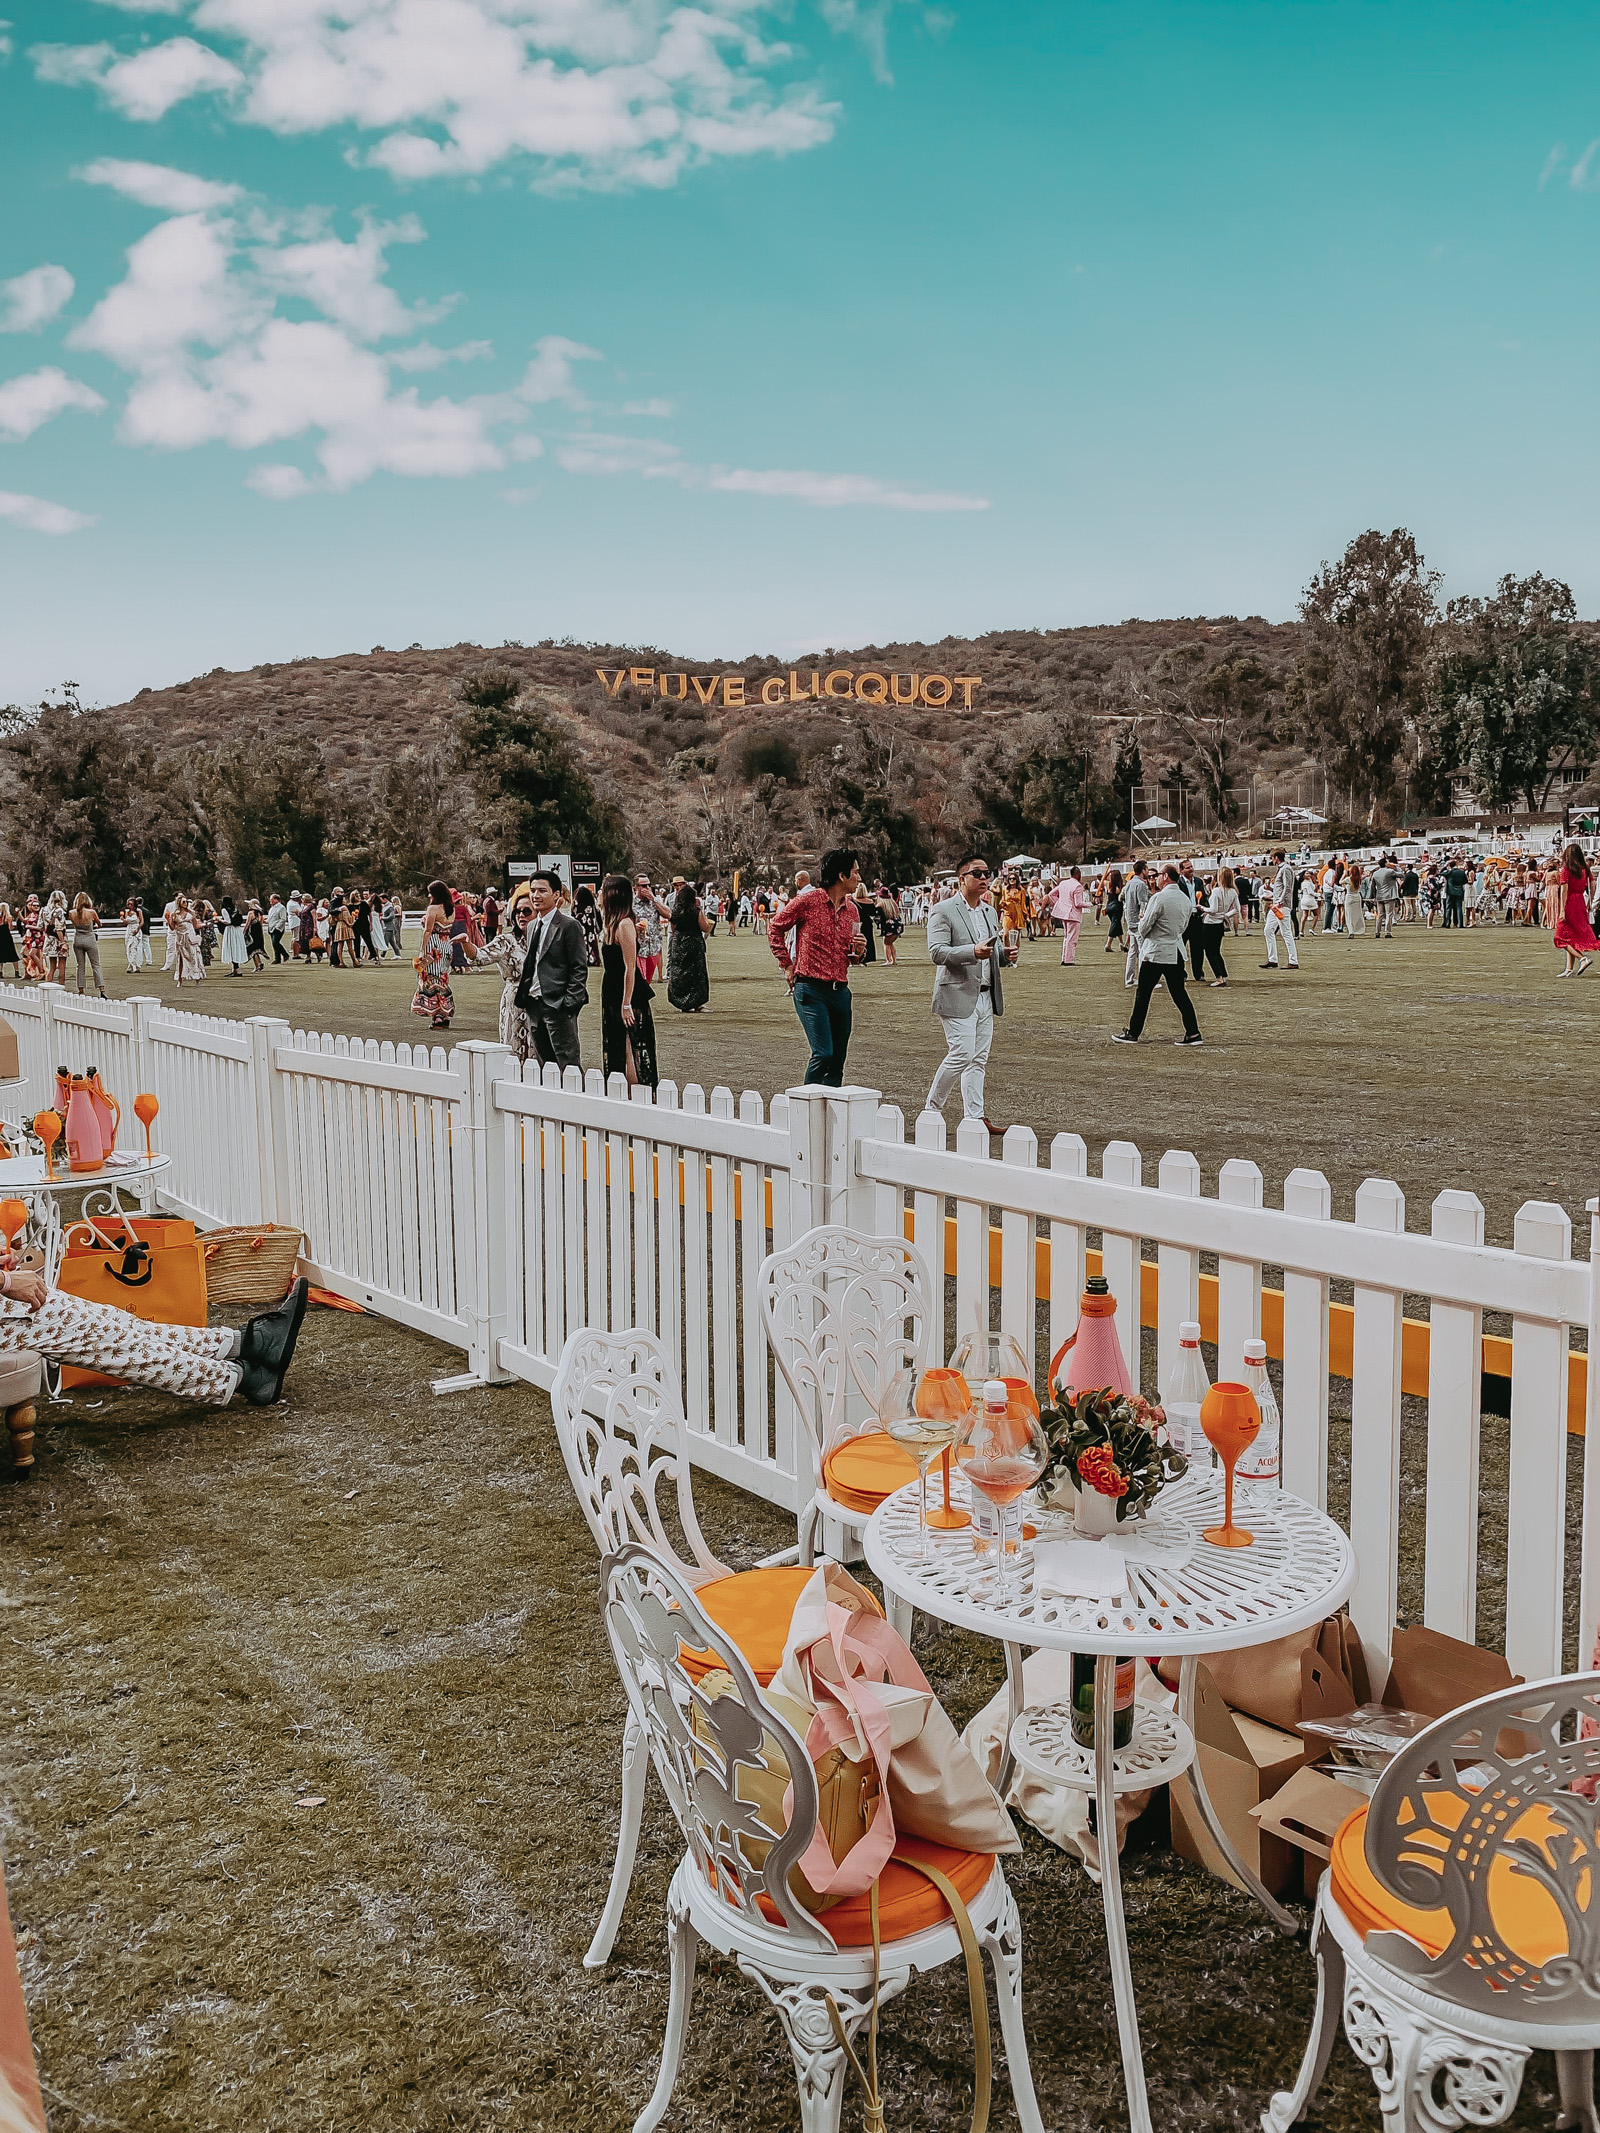 Veuve Clicquot Polo Classic | Rosé Garden | Polo Match | Revolve Dress | Veuve Polo Classic Worth it or Not | Blondie in the City by Hayley Larue